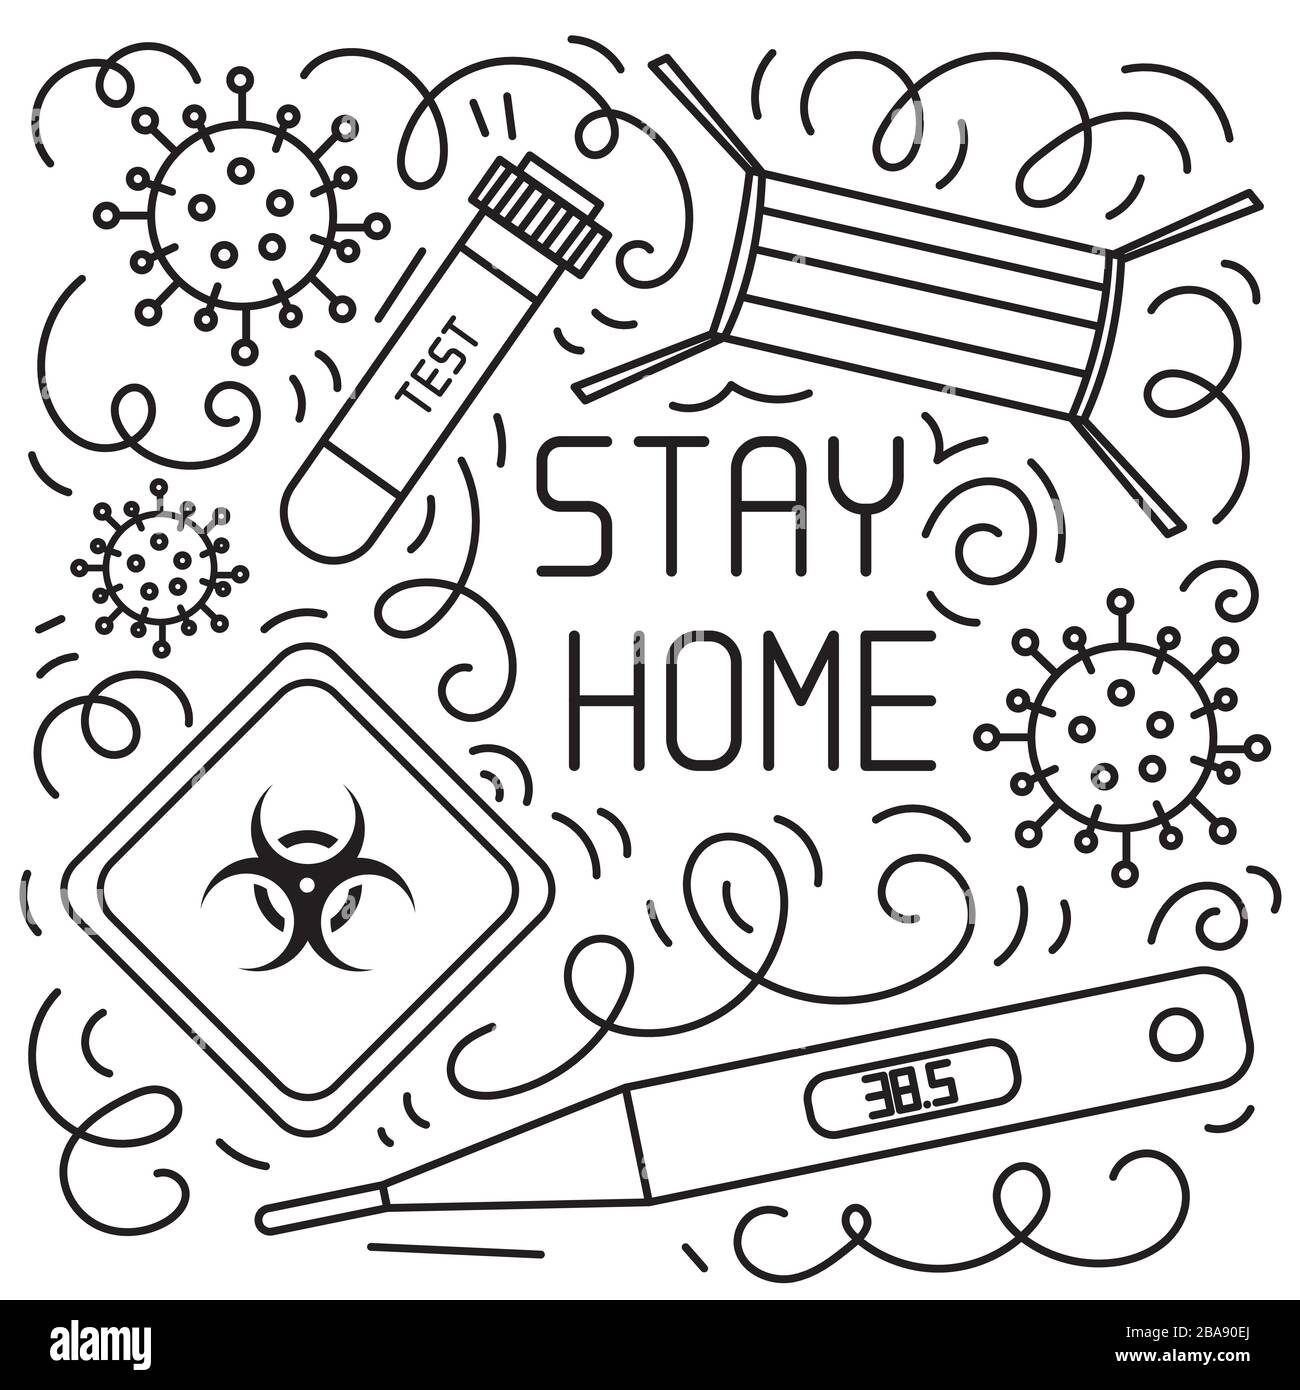 Concept of coronavirus quarantine. Hand drawn vector doodles elements such quarantine sign, respirator mask, hand sanitizer gel, blood test, thermometer and more. Coronavirus campaign to stay home Stock Vector